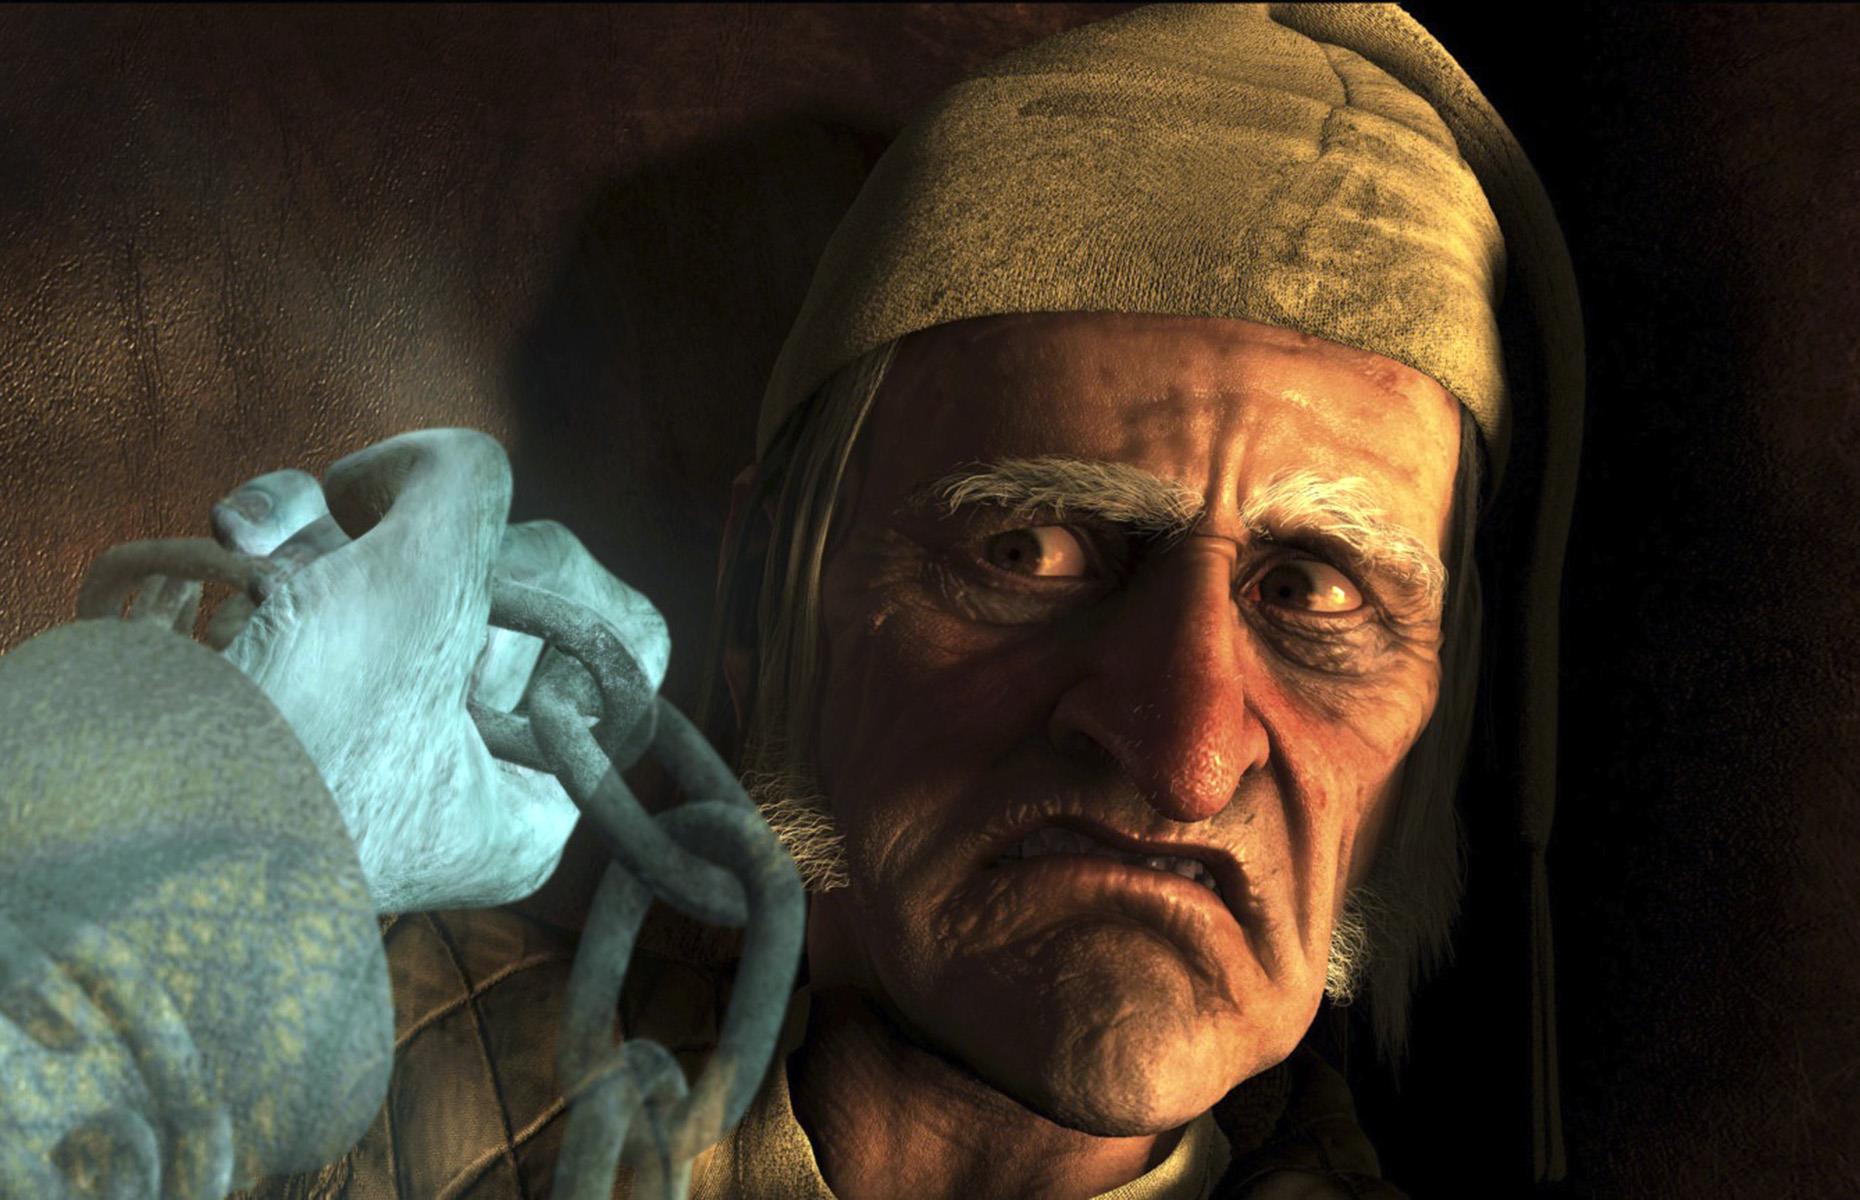 <p>Disney's take on Charles Dickens's classic <em>A Christmas Carol</em>, starring Jim Carrey as the voice of the villainous Ebenezer Scrooge, hit screens in 2009.</p>  <p>Despite negative reviews that slammed everything from the overly spooky script to the motion capture CGI, the film grossed a respectable $325 million globally, resulting in a profit of $125 million against its production budget.</p>  <p>Unfortunately, that still wasn't enough to save the ill-fated holiday flick. When factoring in marketing costs, it's estimated the box office bomb lost Disney around $100 million.  </p>